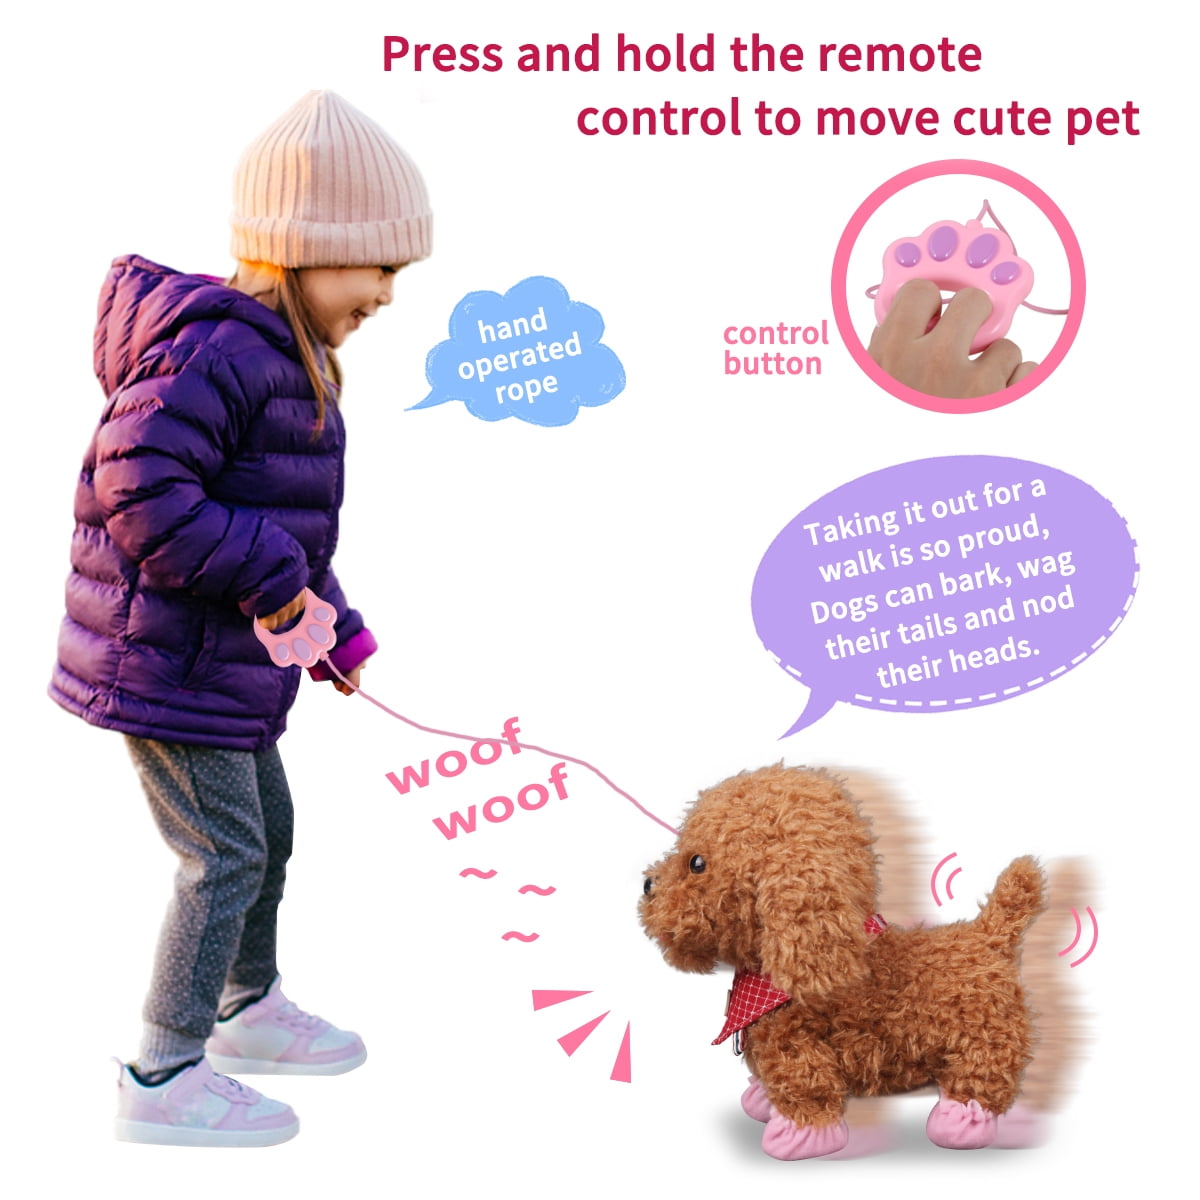 JEEXI Walking Barking Toy Dog with Remote Control Leash, 10 Plush Puppy  Electronic Interactive Toys for Kids, Shake Tail, Pretend Realistic Stuffed Animal  Dog Age 2 3 4 5+ Years Old Best Gift 